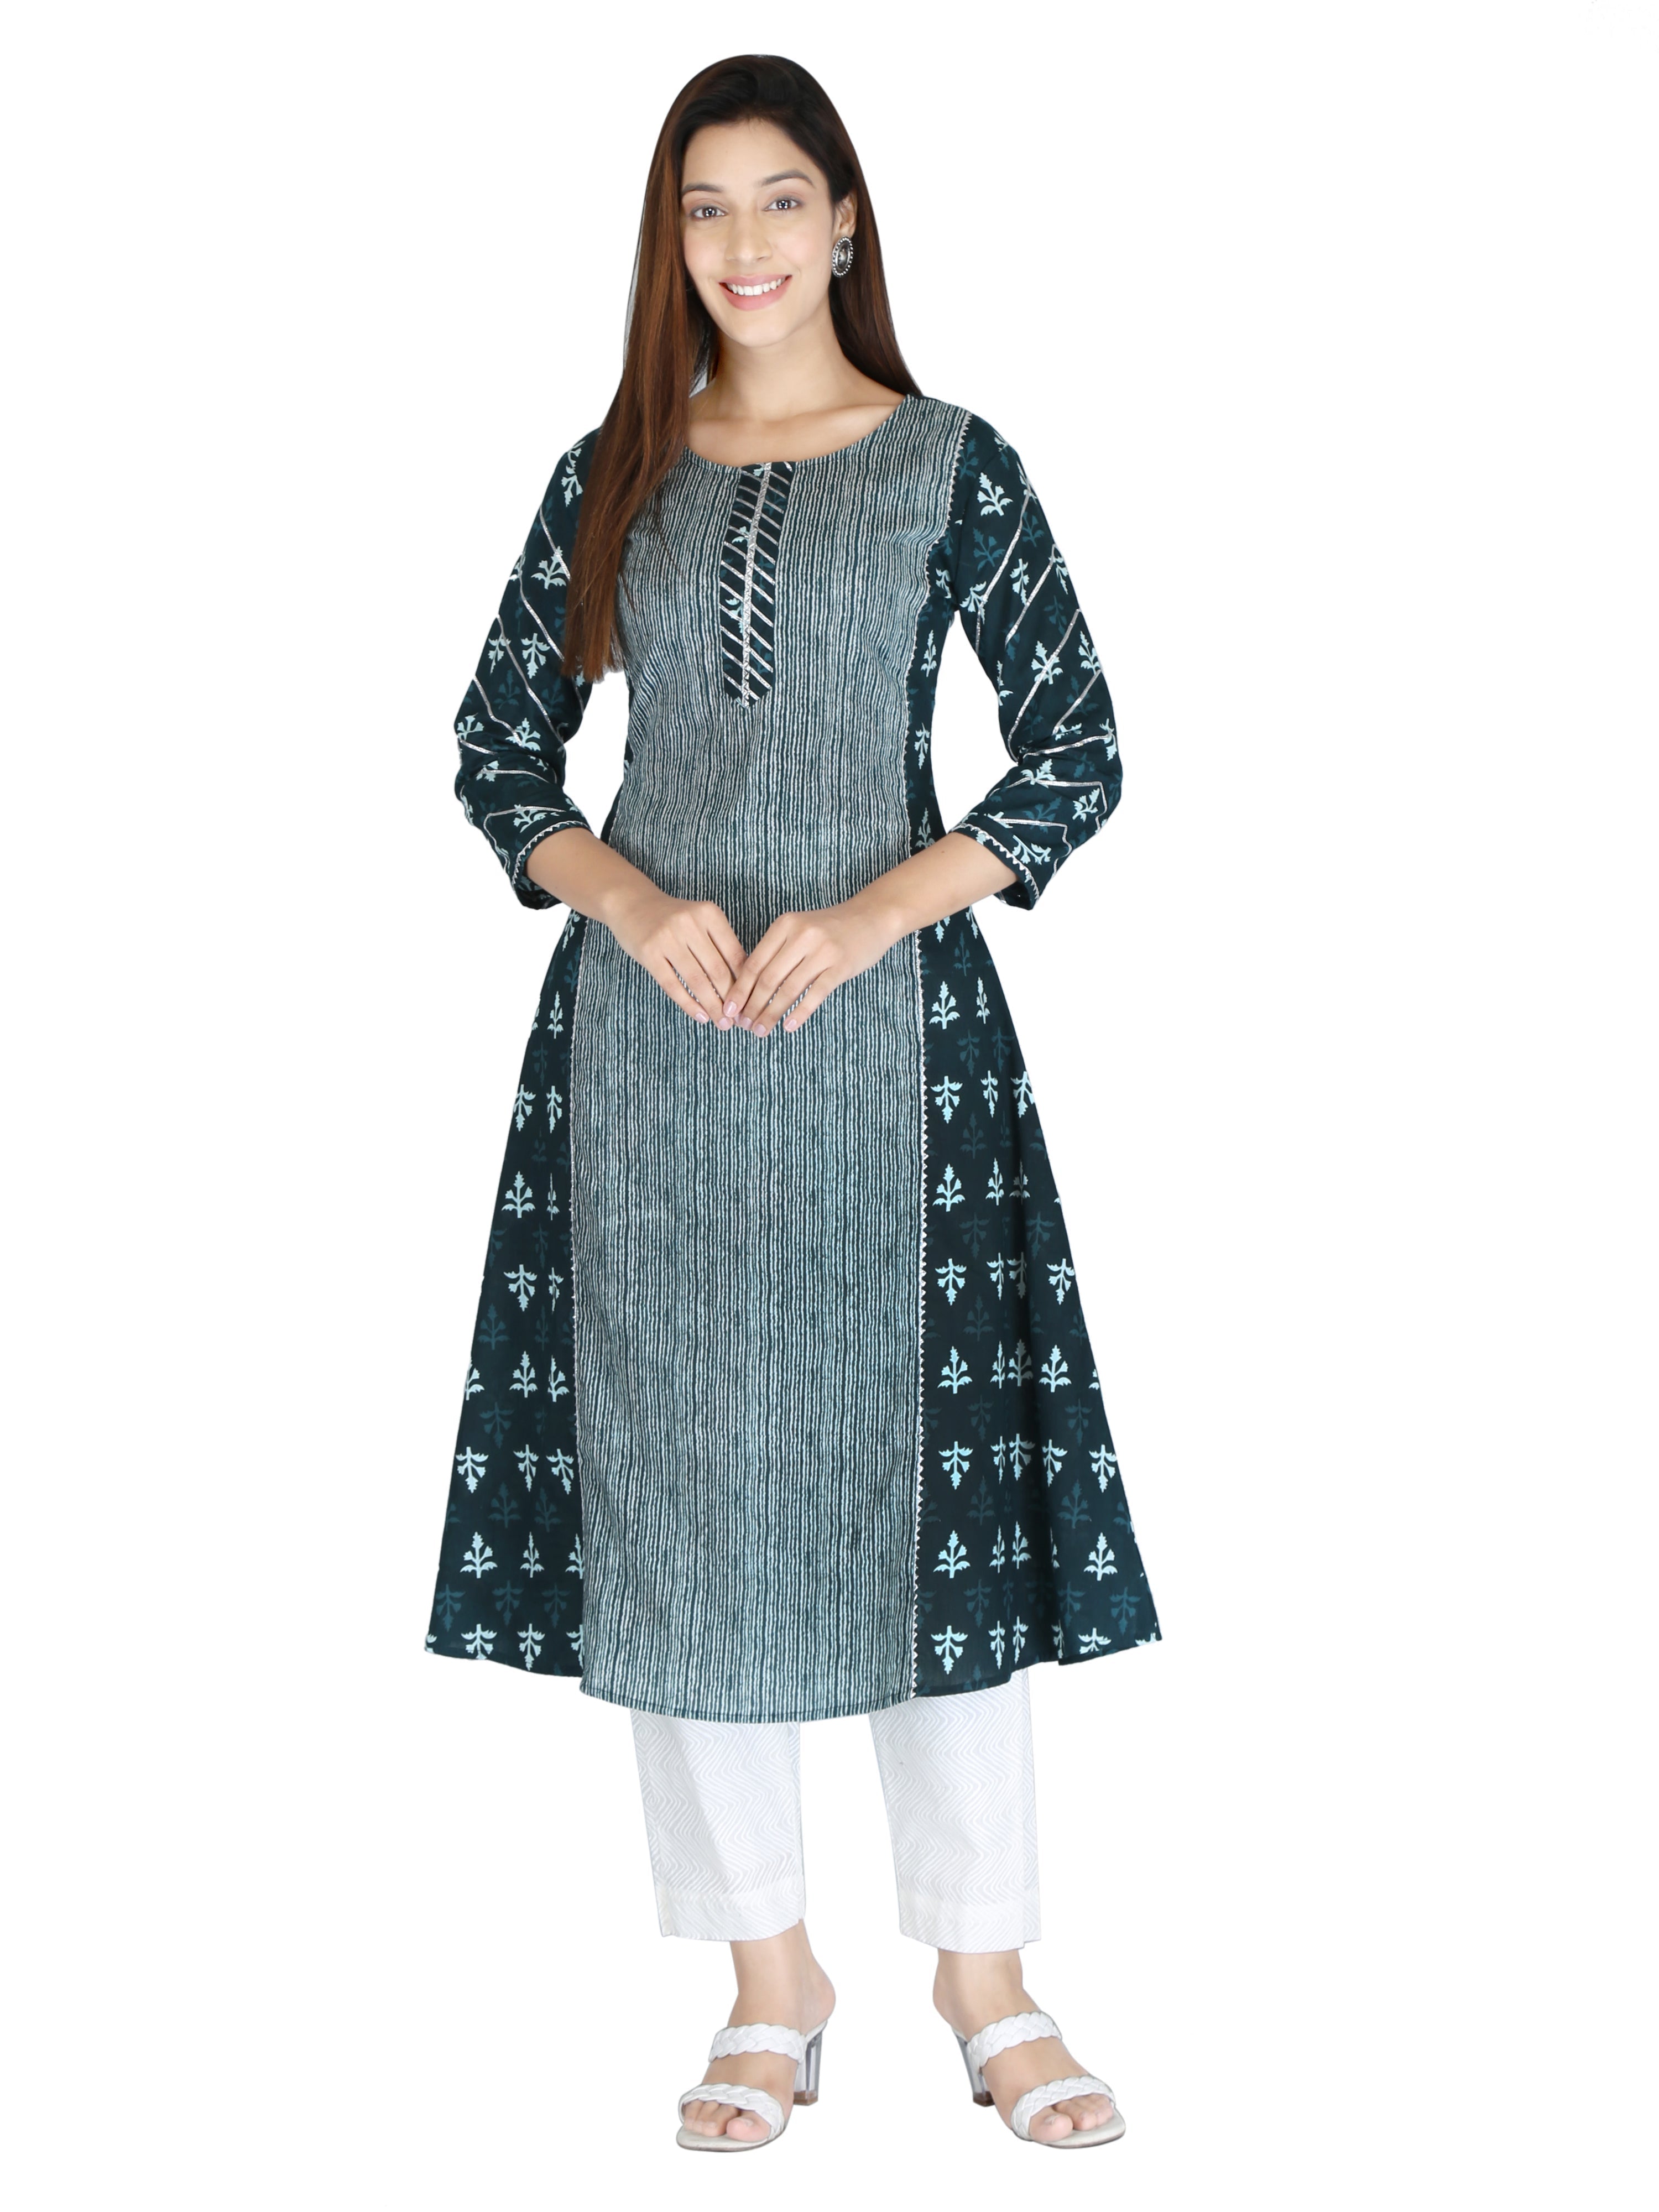 Lime Green Floral Printed Pure Cotton Kurta